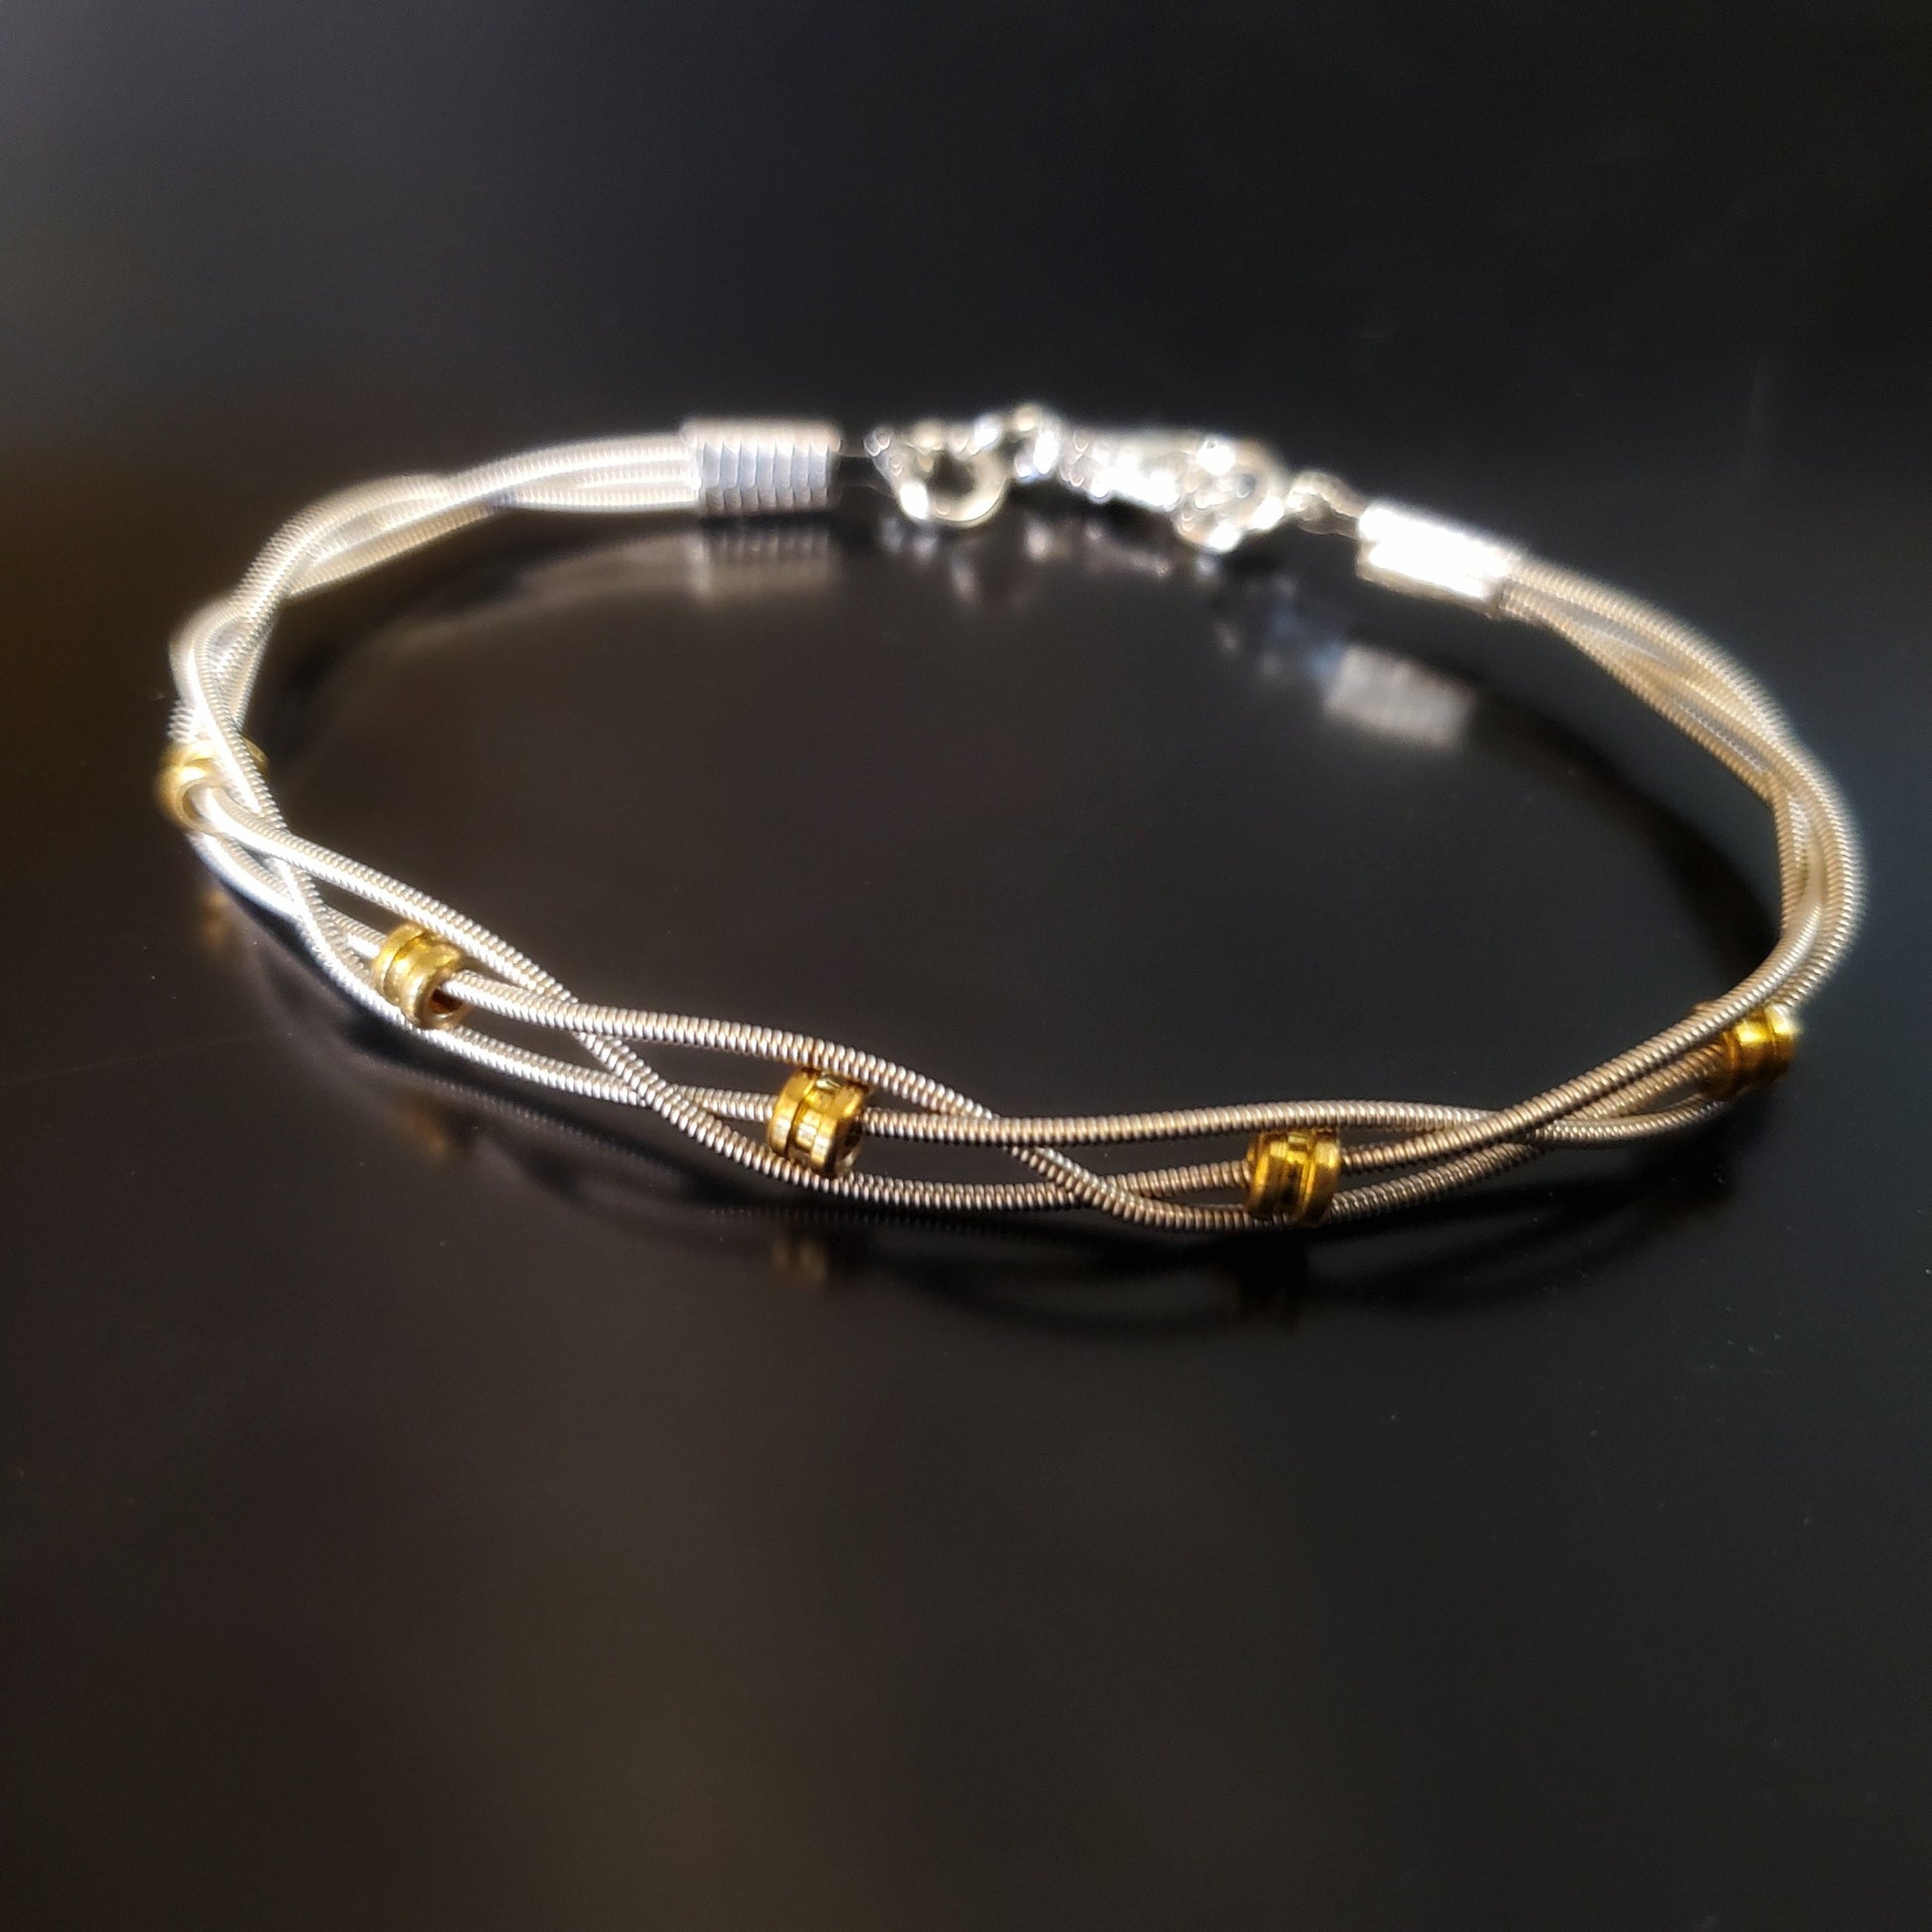 bracelet made with 3 strands of silver coloured guitar strings and 5 gold coloured guitar string ballends on a black background